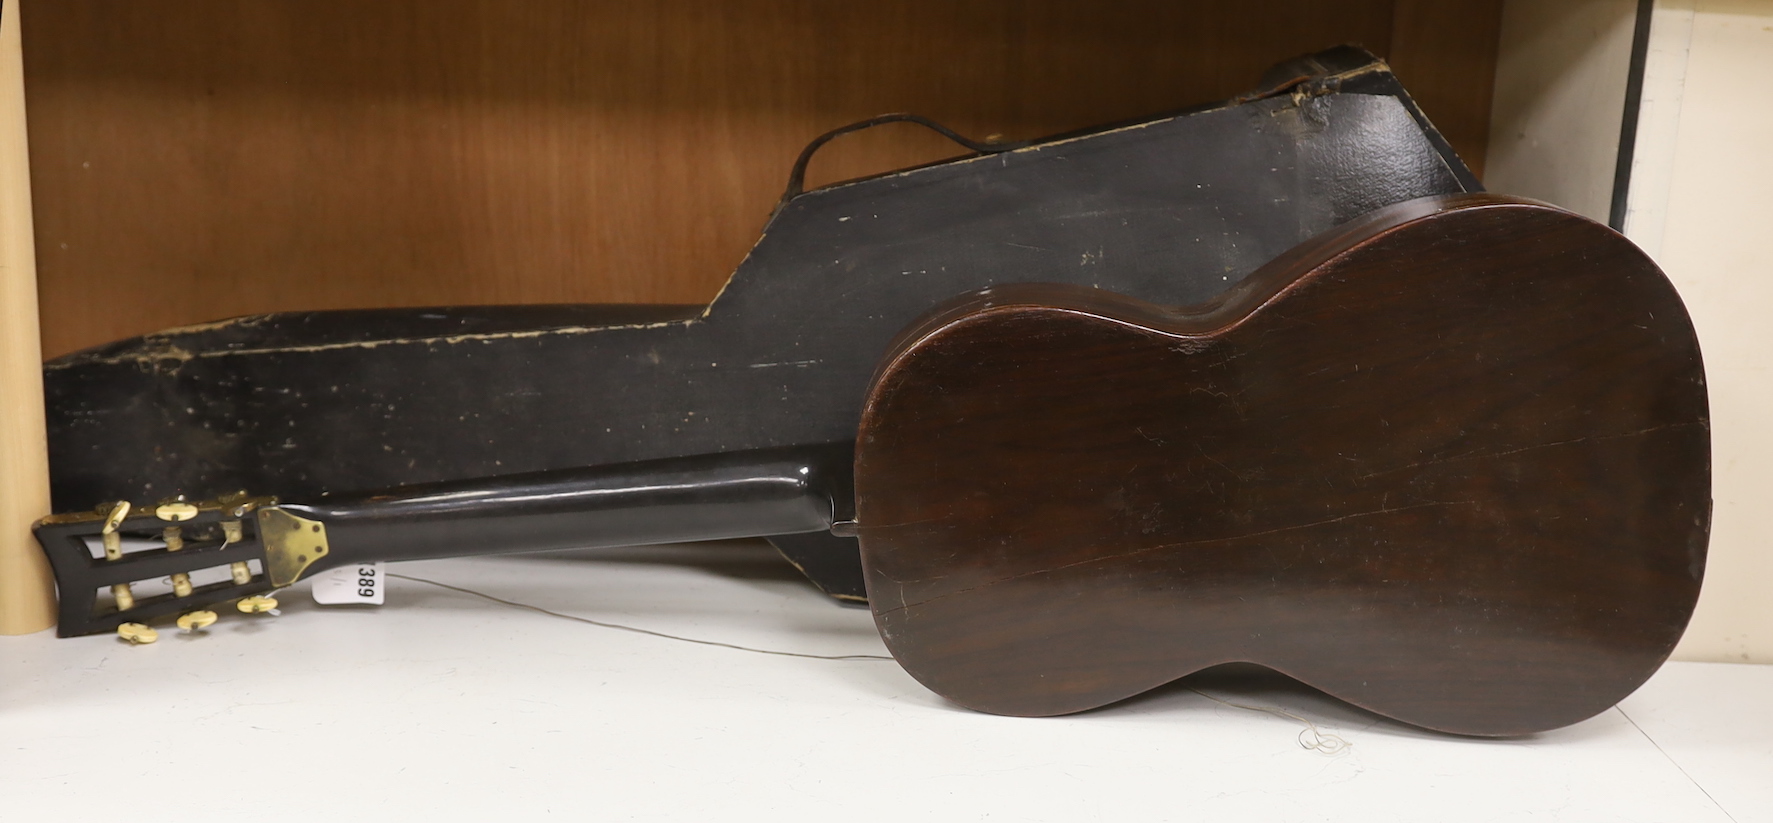 A parlour guitar with hard case. Ivory submission reference: J3WBGCHD